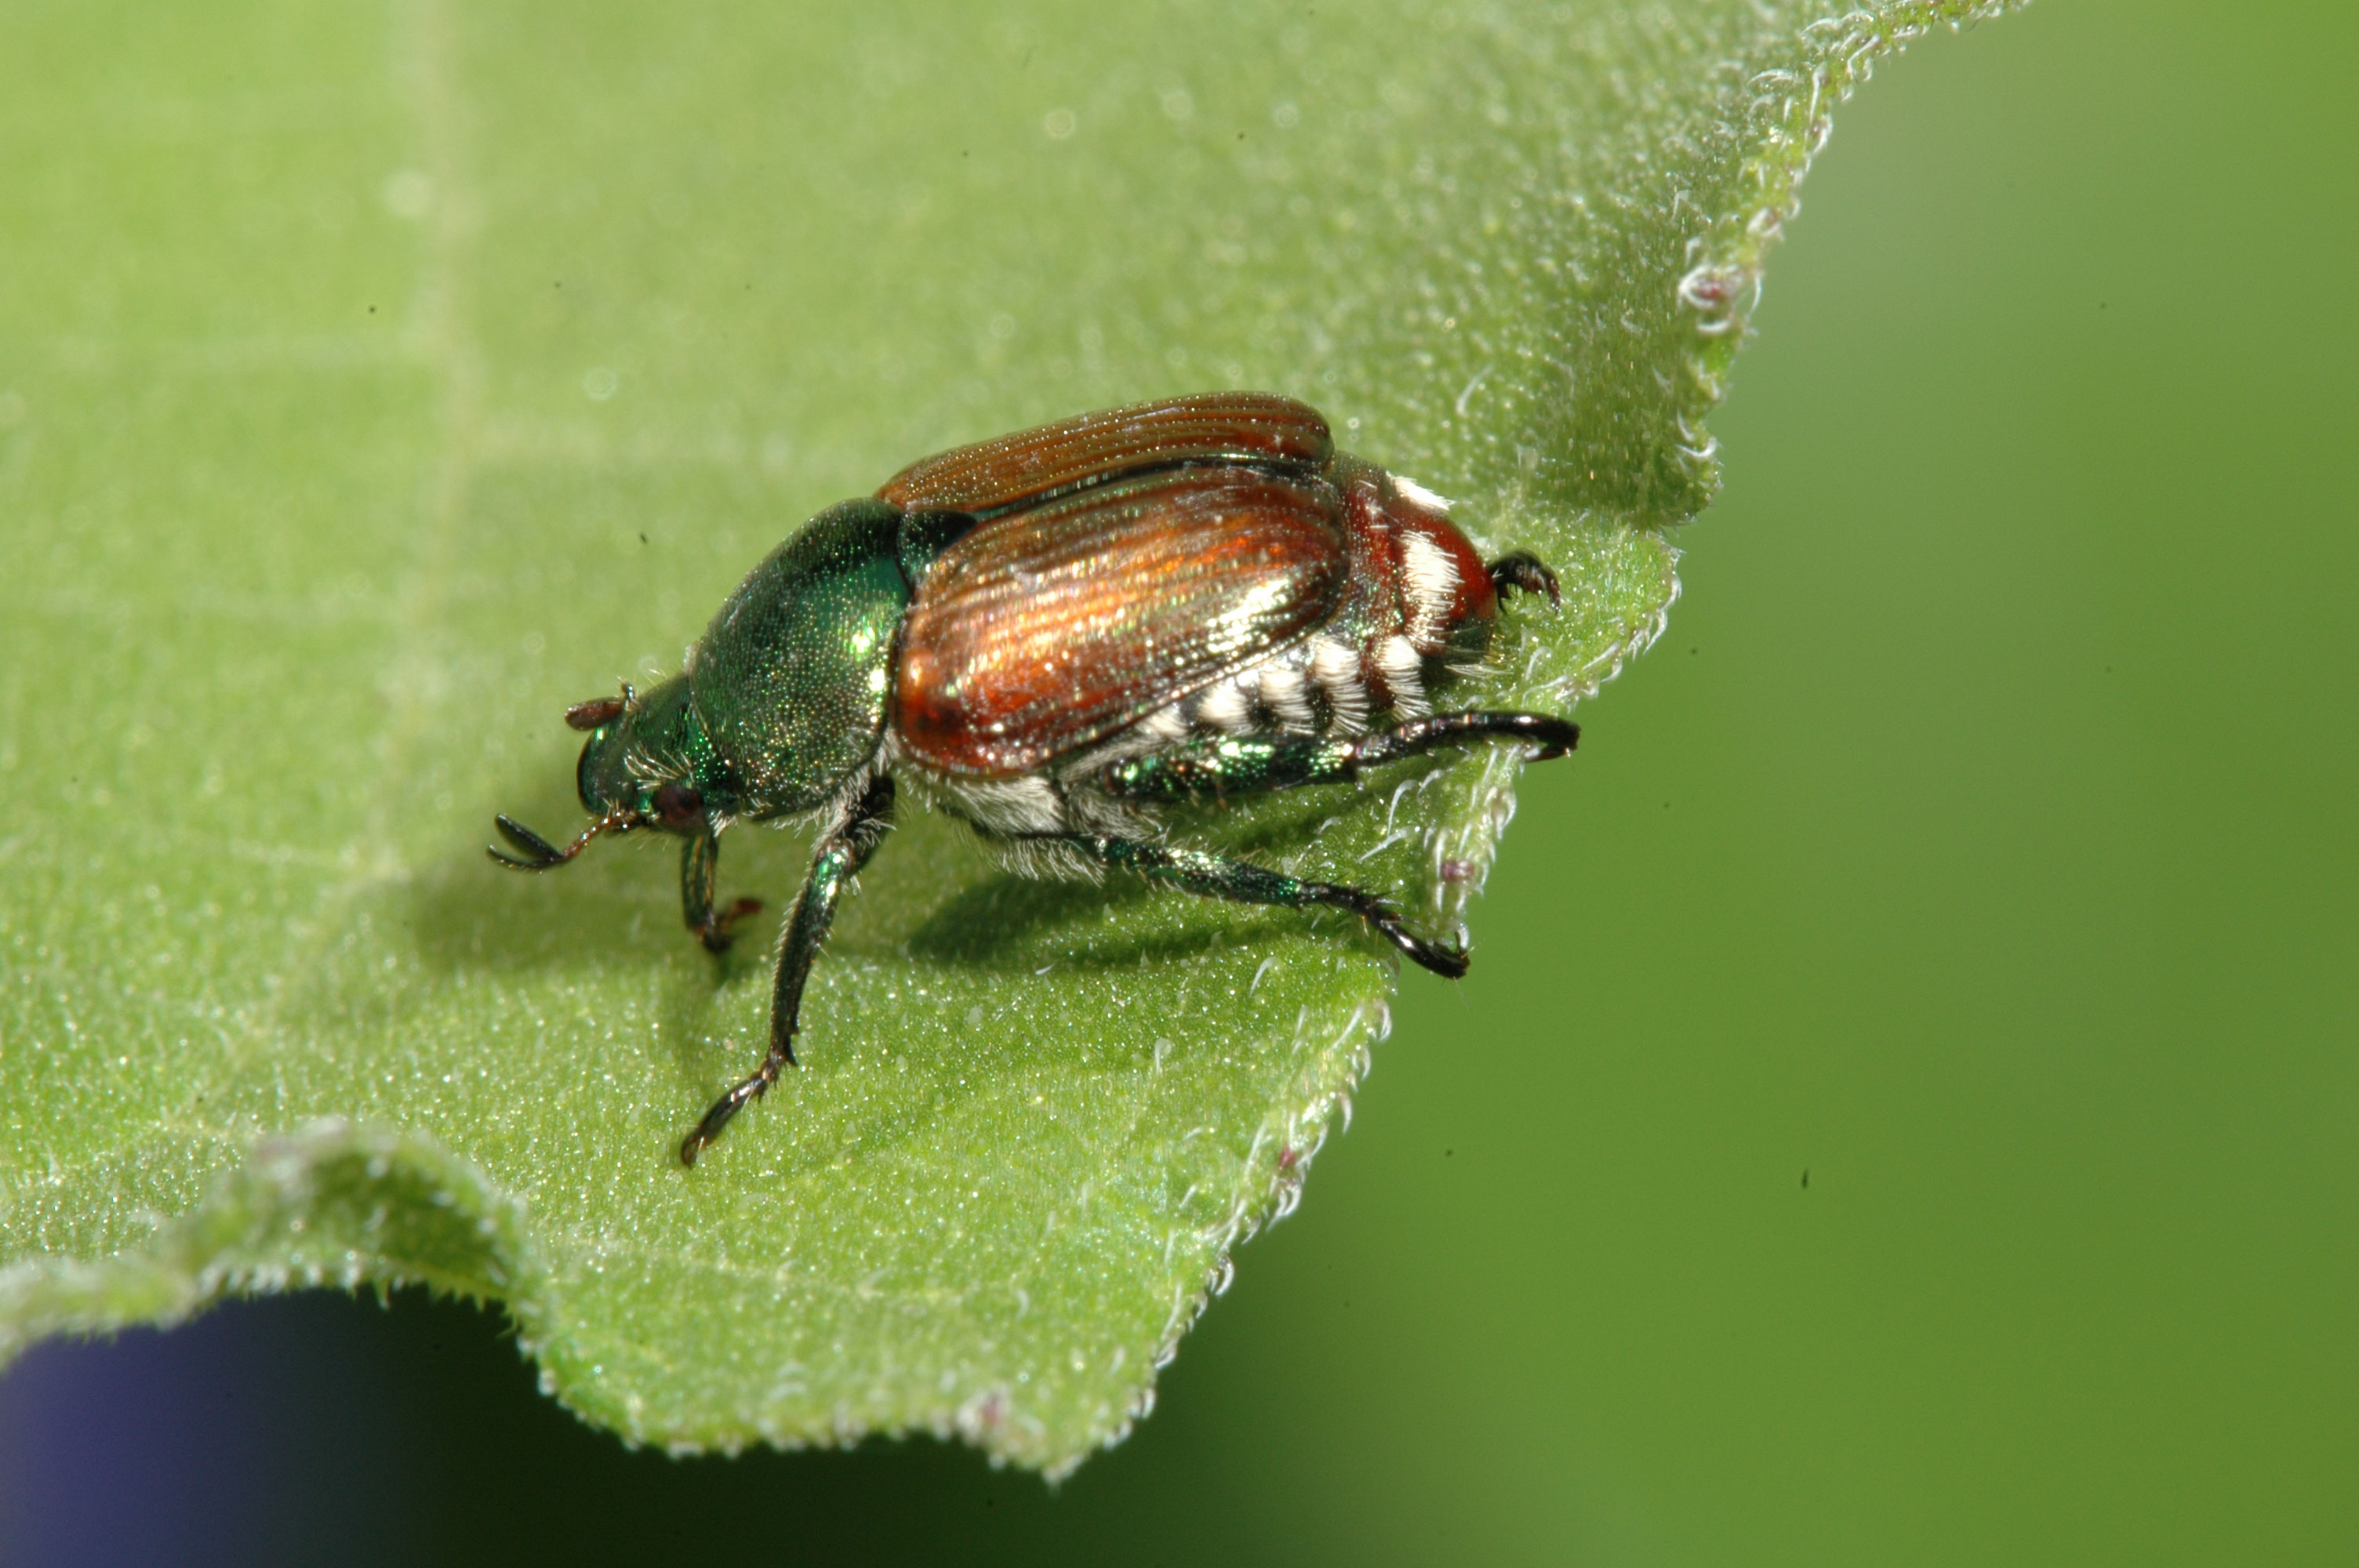 How Long Does It Take Sevin to Kill Japanese Beetles: Rapid Elimination Revealed